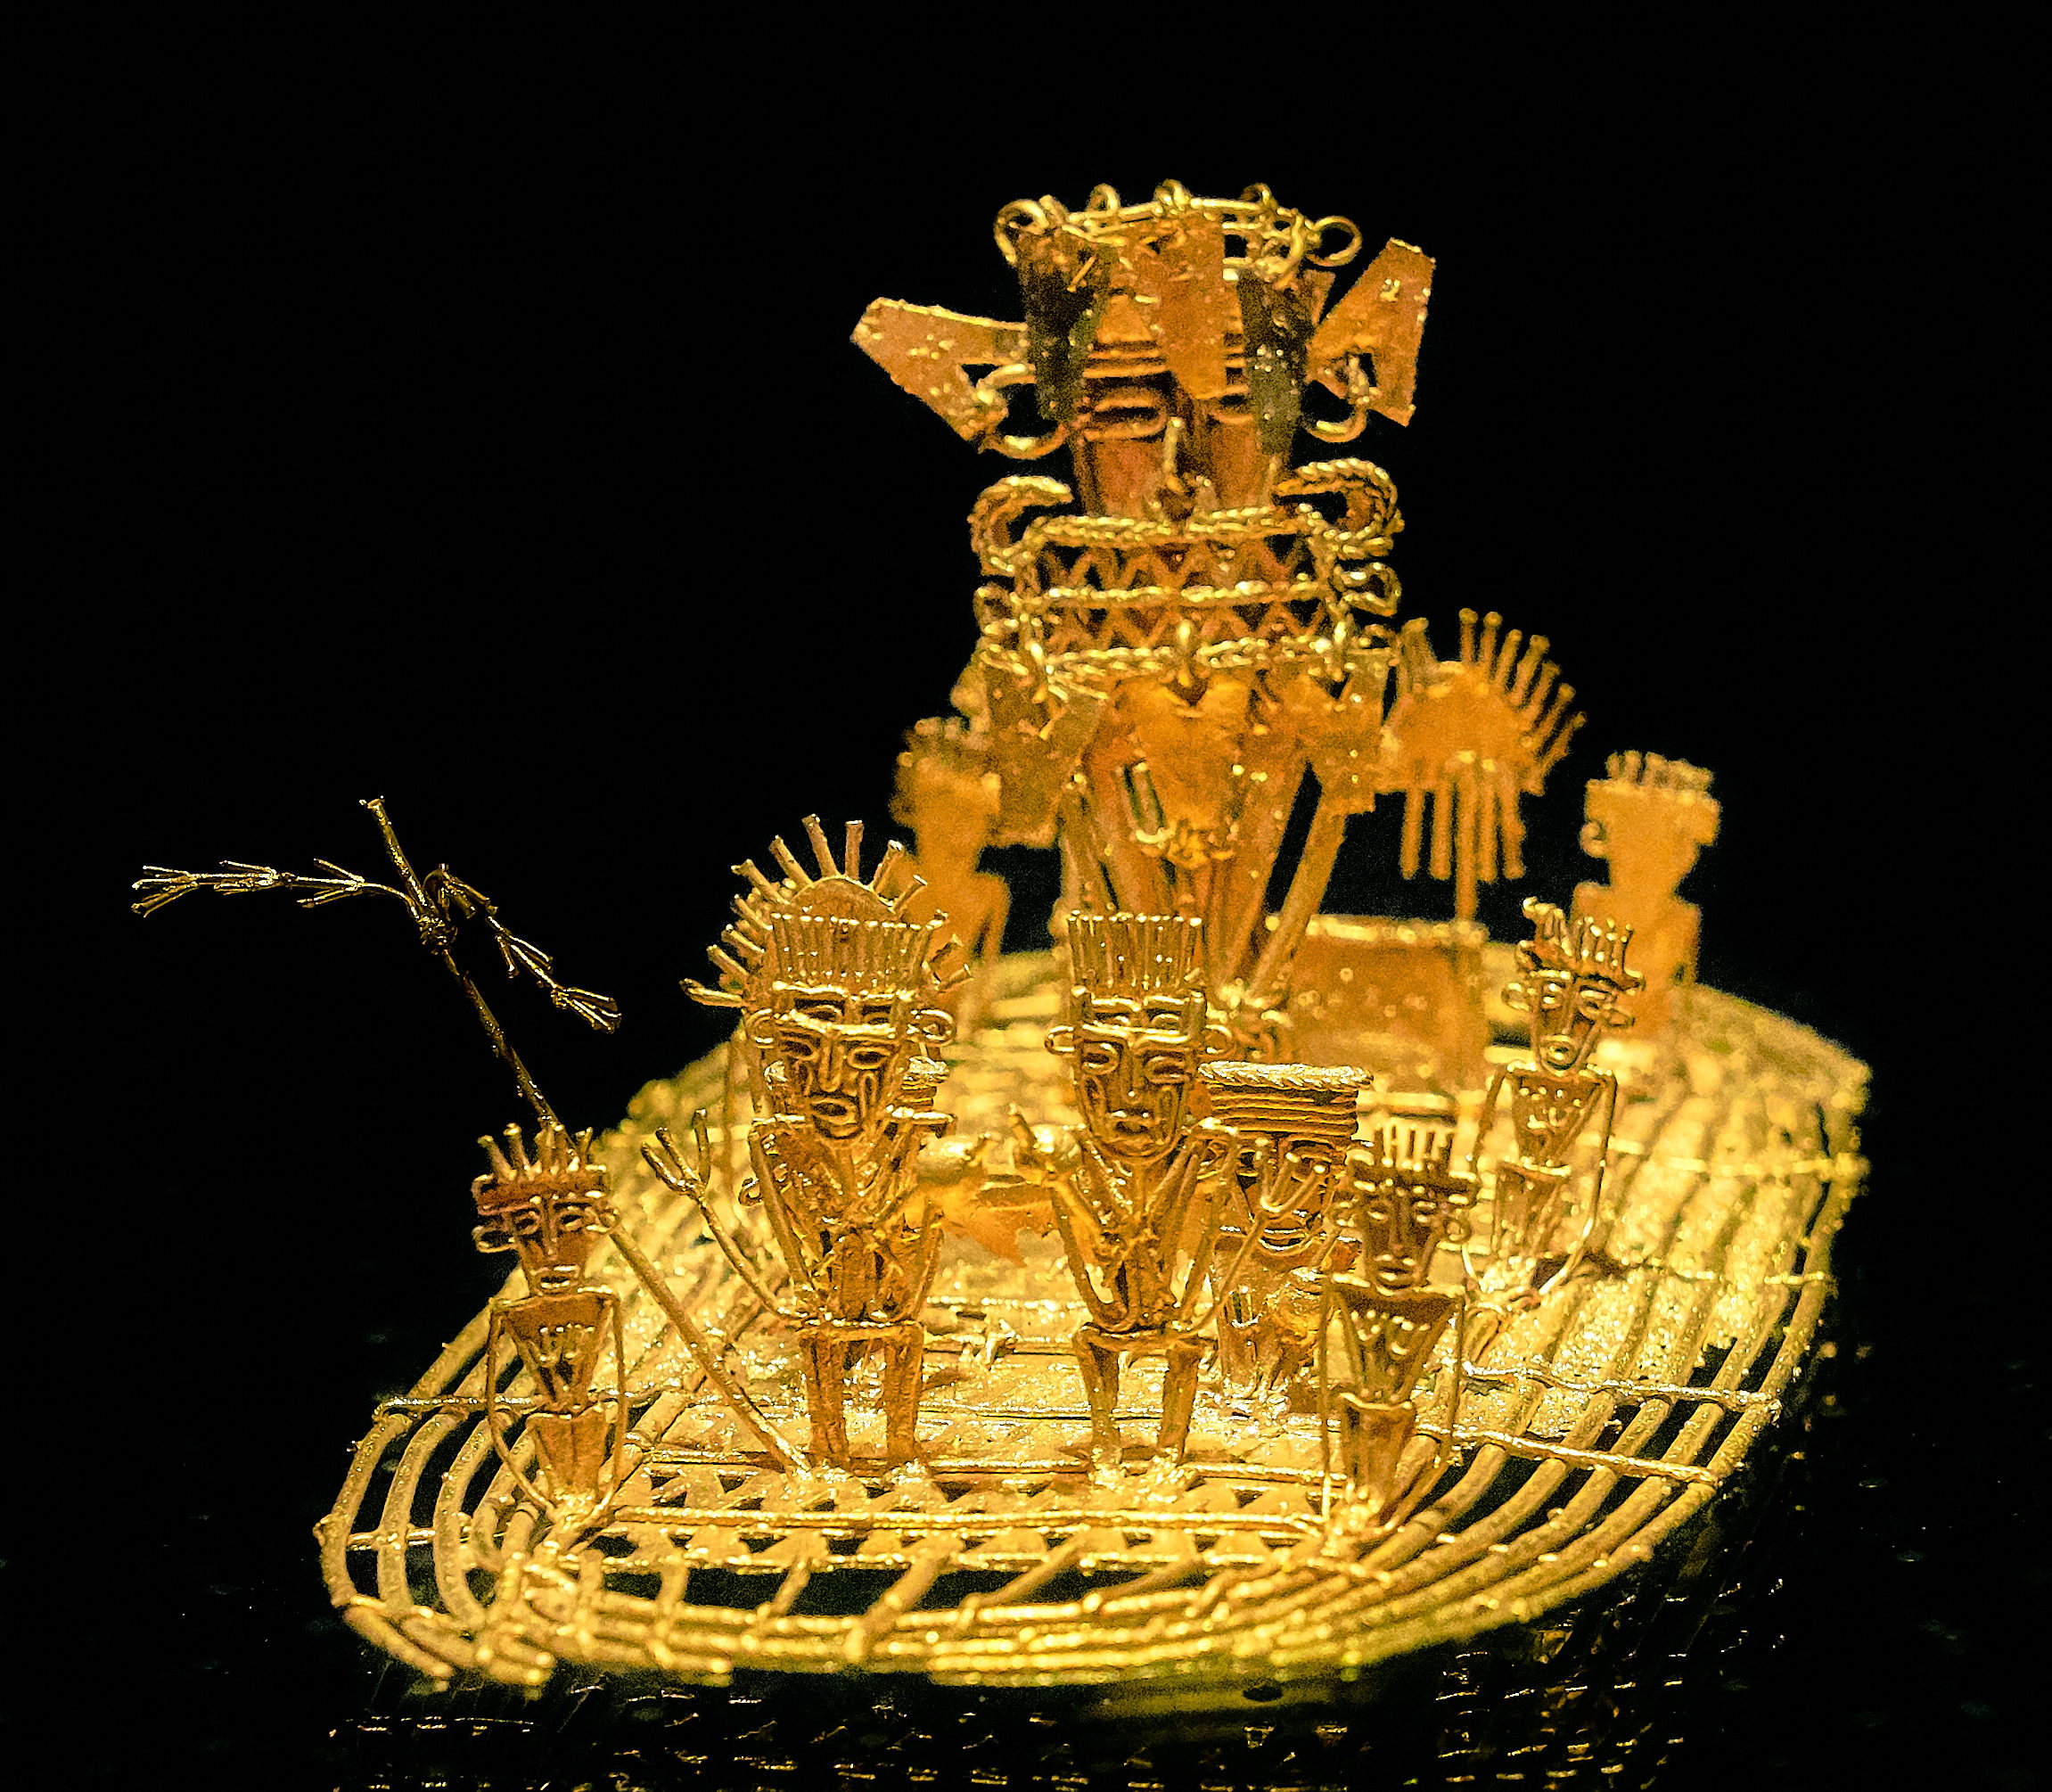 Muisca Raft, 600–1600, cast gold alloy, Museo del Oro (Gold Museum), Bogotá, Colombia